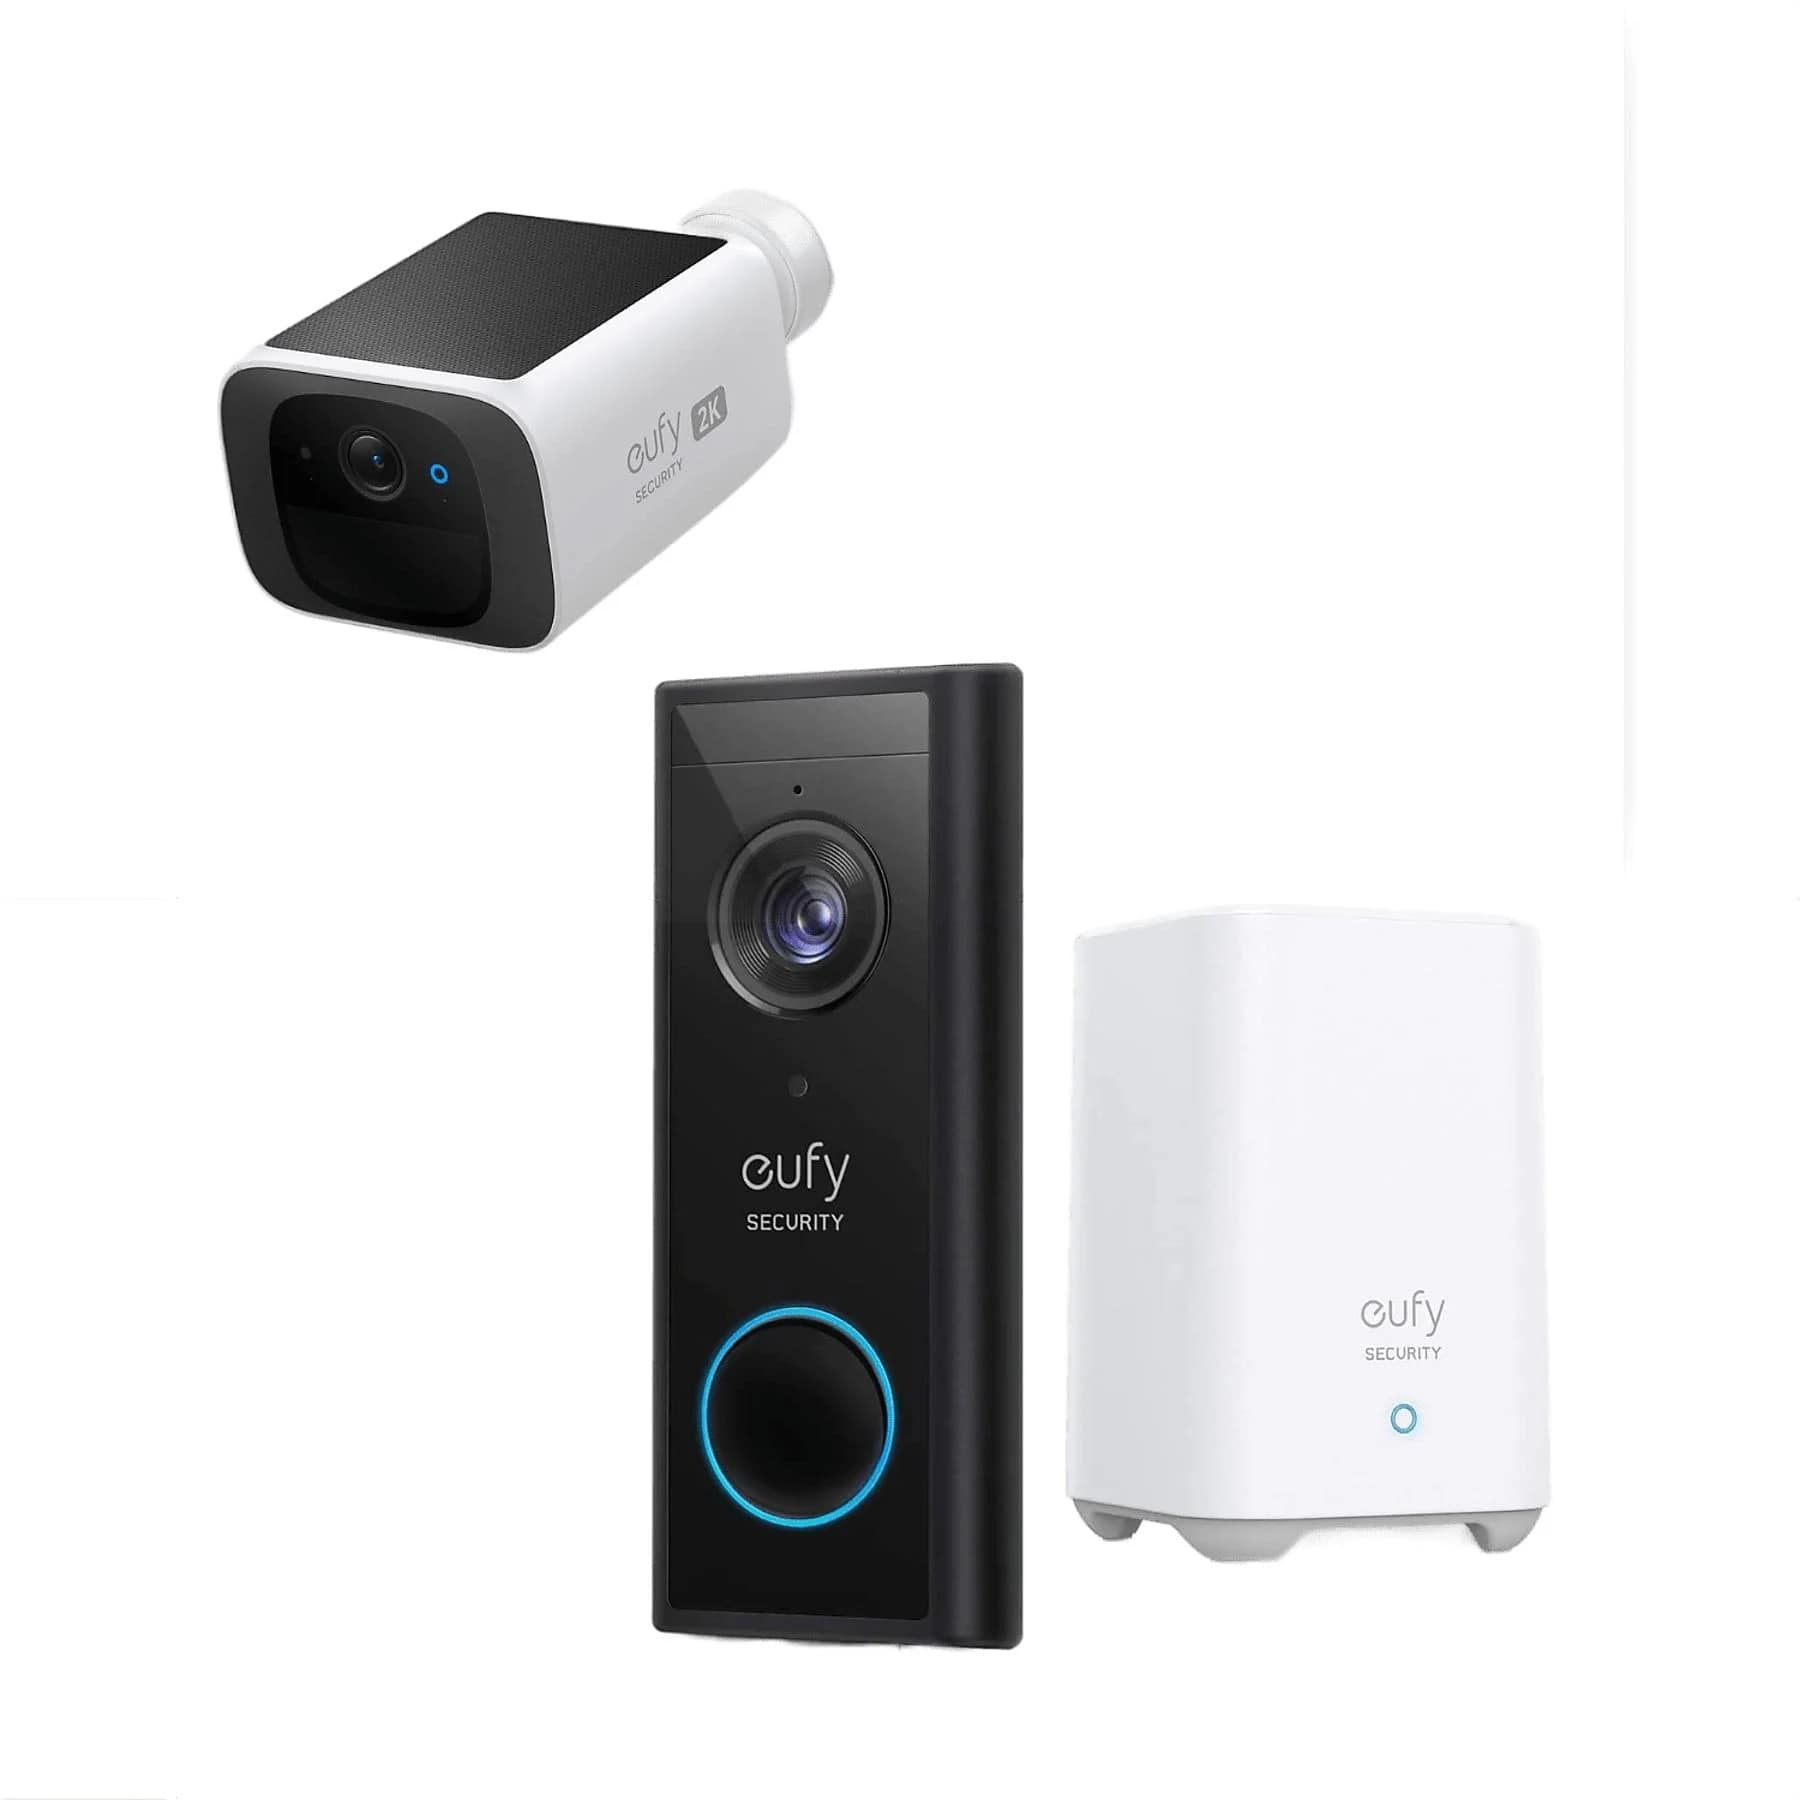 eufy Security - Wireless Video Doorbell 2K + eufy security S220 SoloCam - On-Device AI for Human Detection - Solar Security Camera - Wireless Outdoor Camera - Forever Power